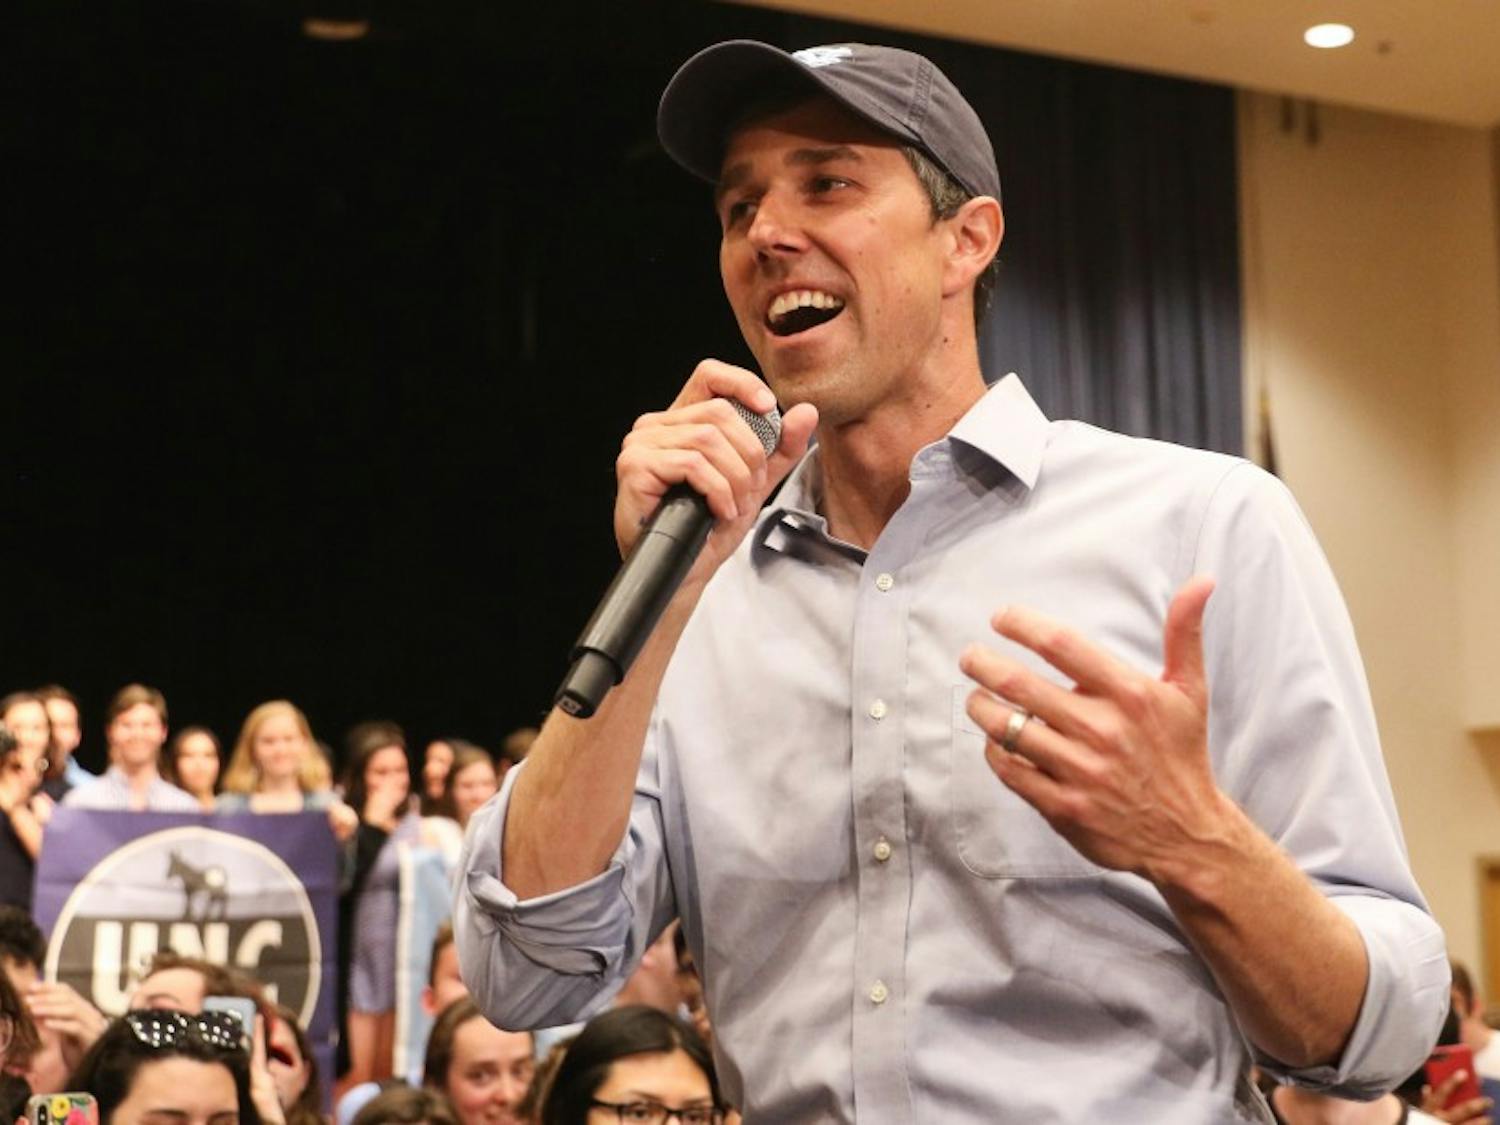 Presidential candidate Beto O'Rourke comes to University of North Carolina